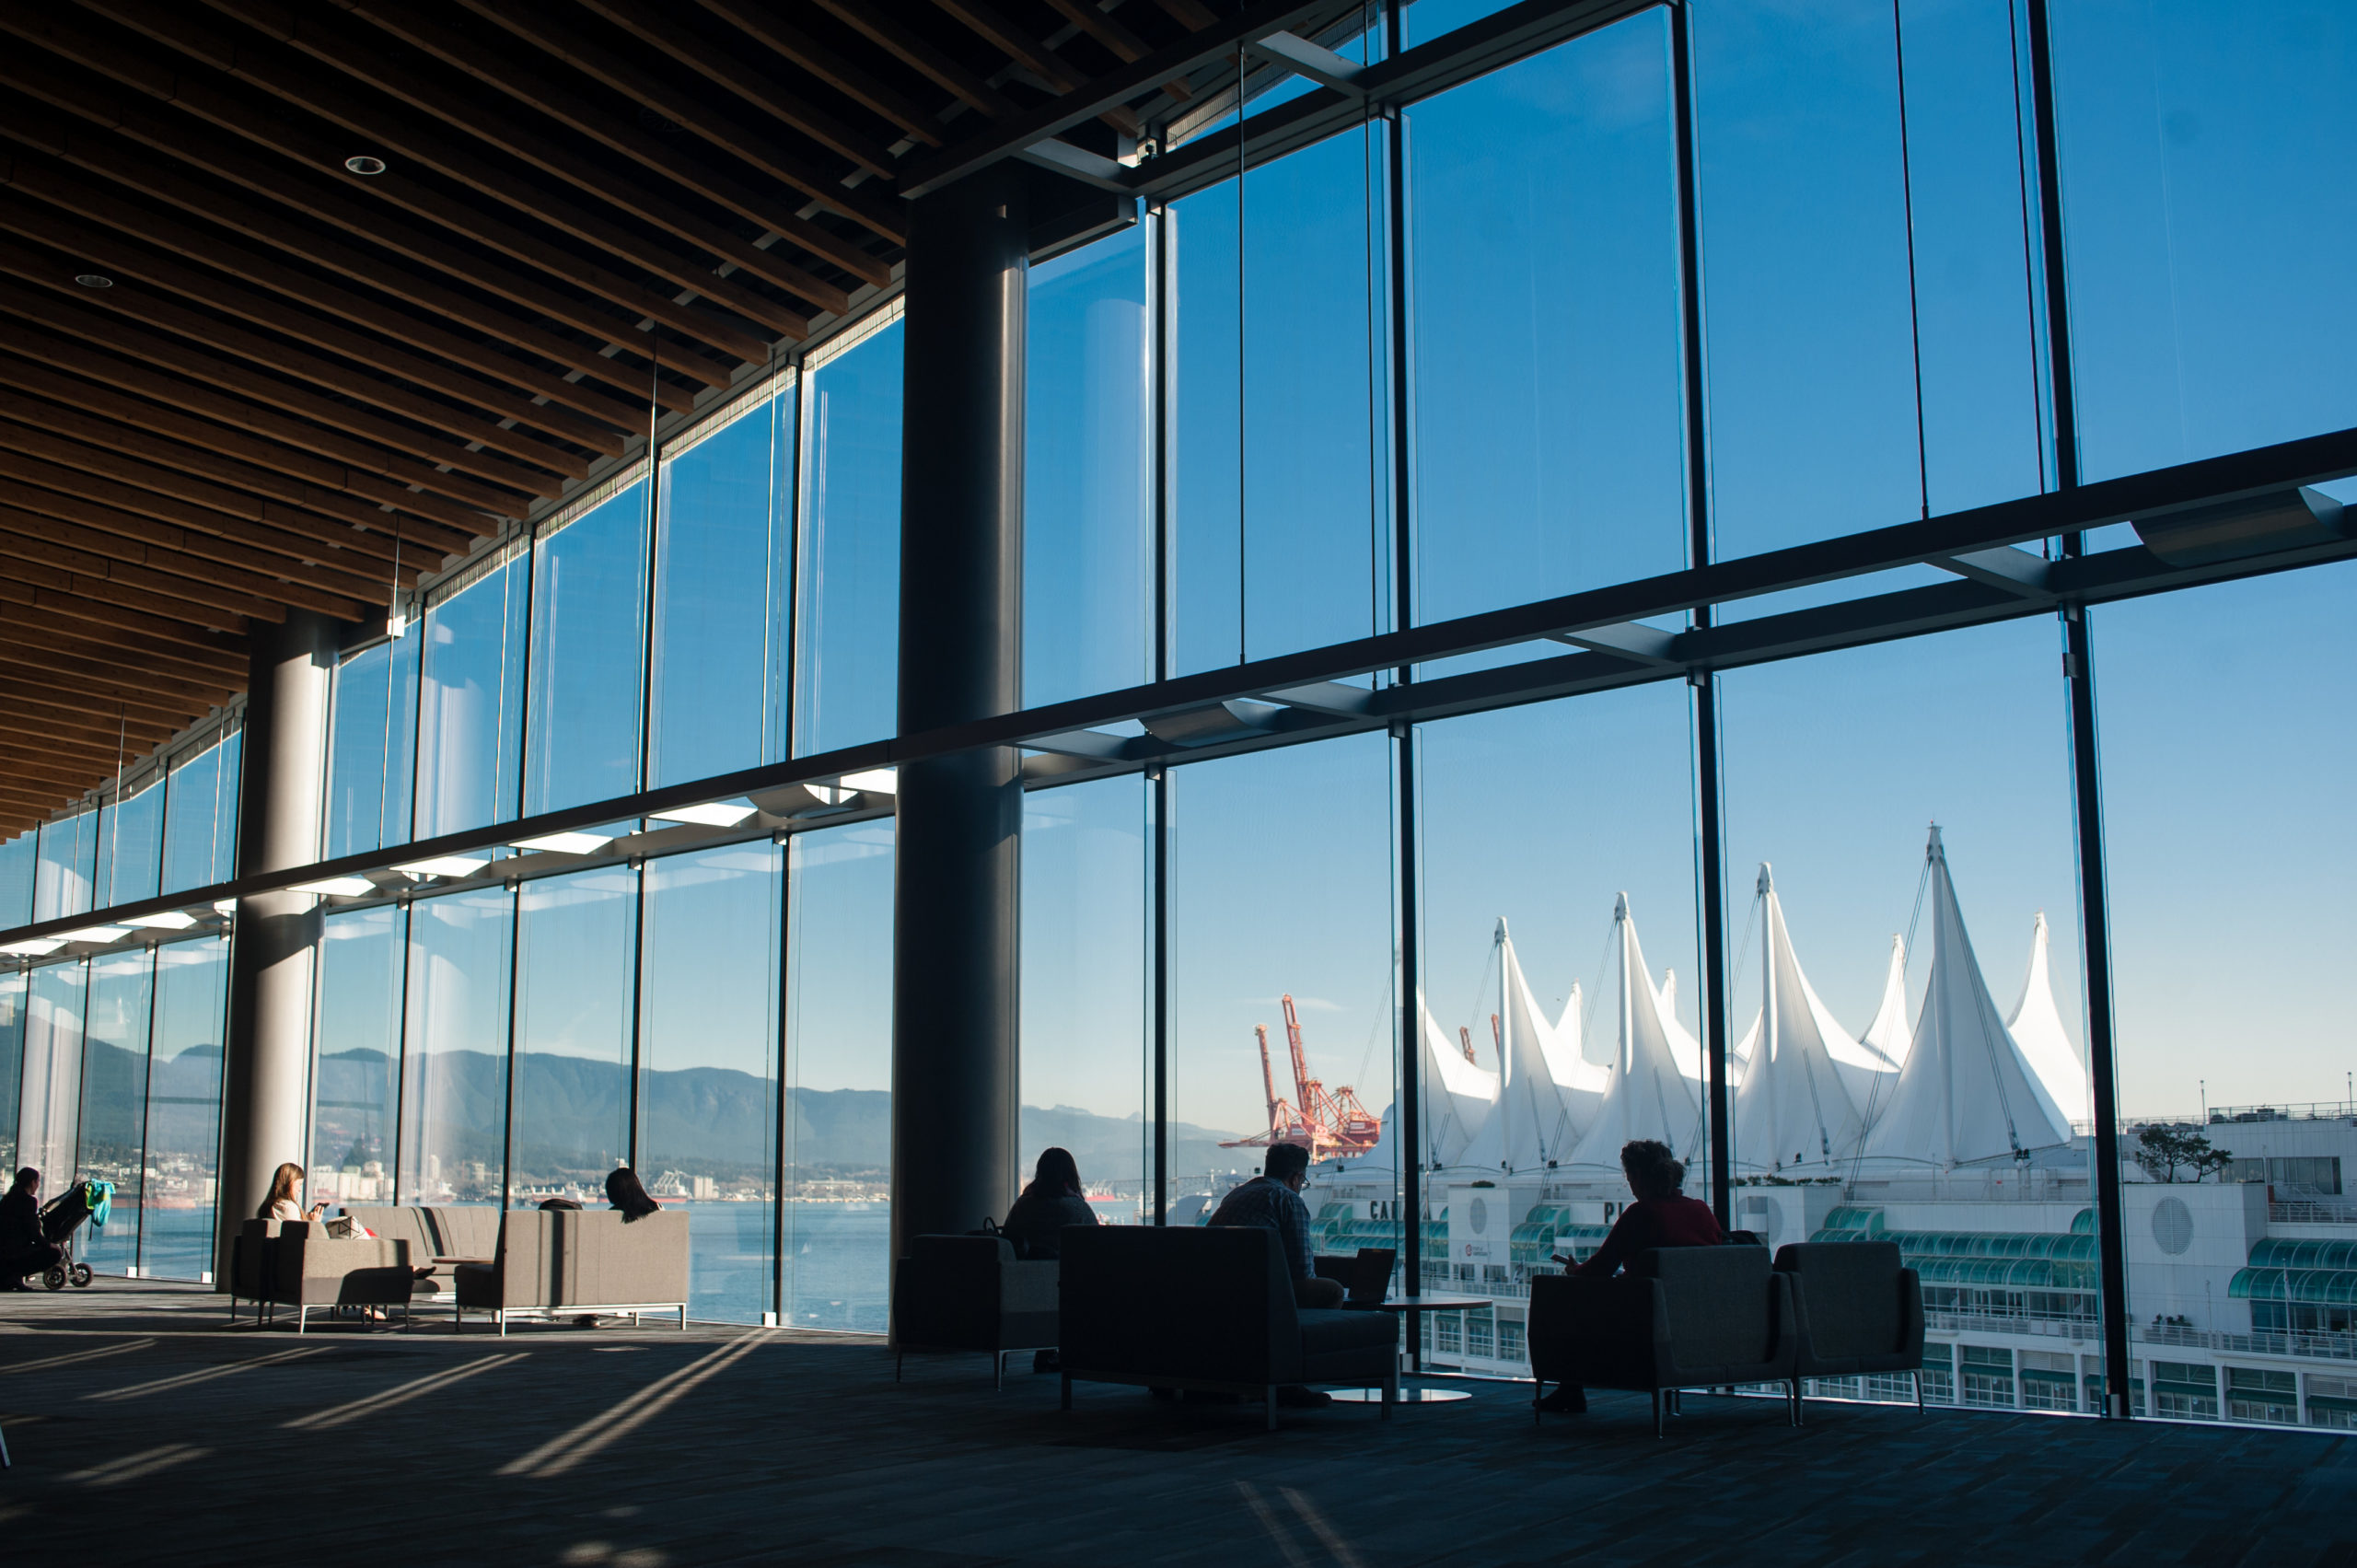 Photo from inside of the Vancouver Convention Center of the outside view through its windows.